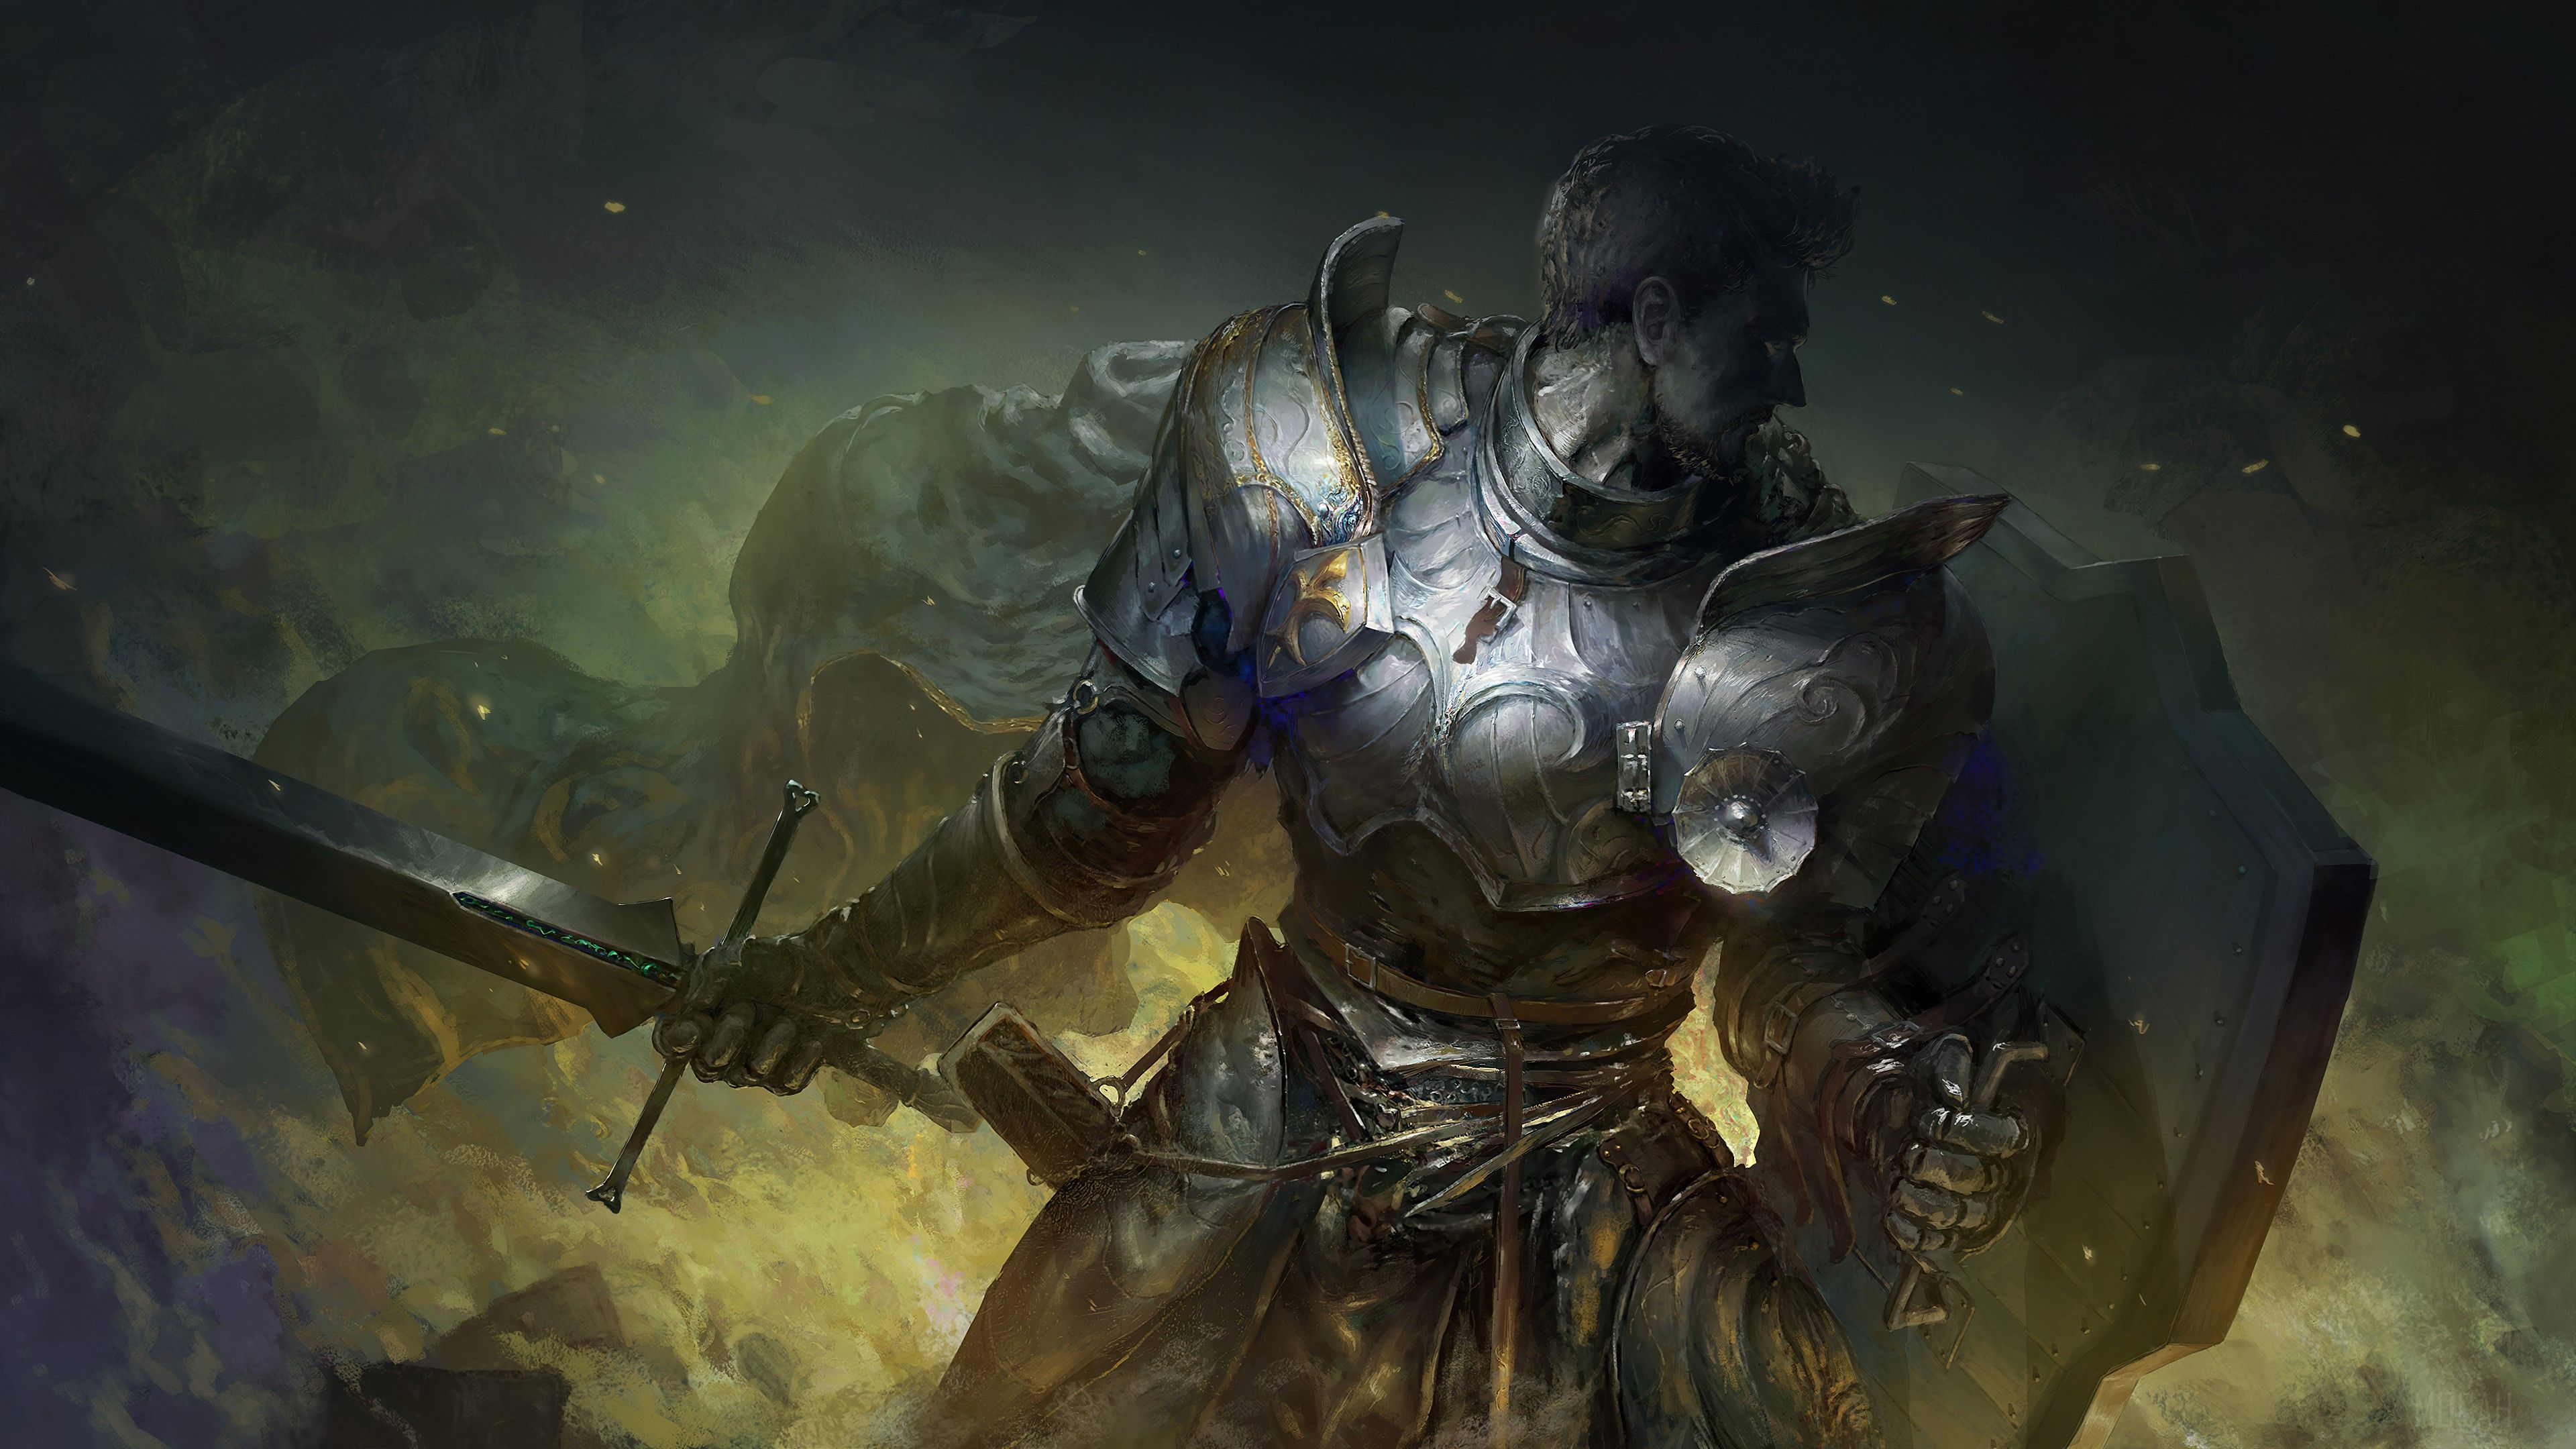 Fantasy Knight Wallpapers - Top Free Fantasy Knight Backgrounds ...